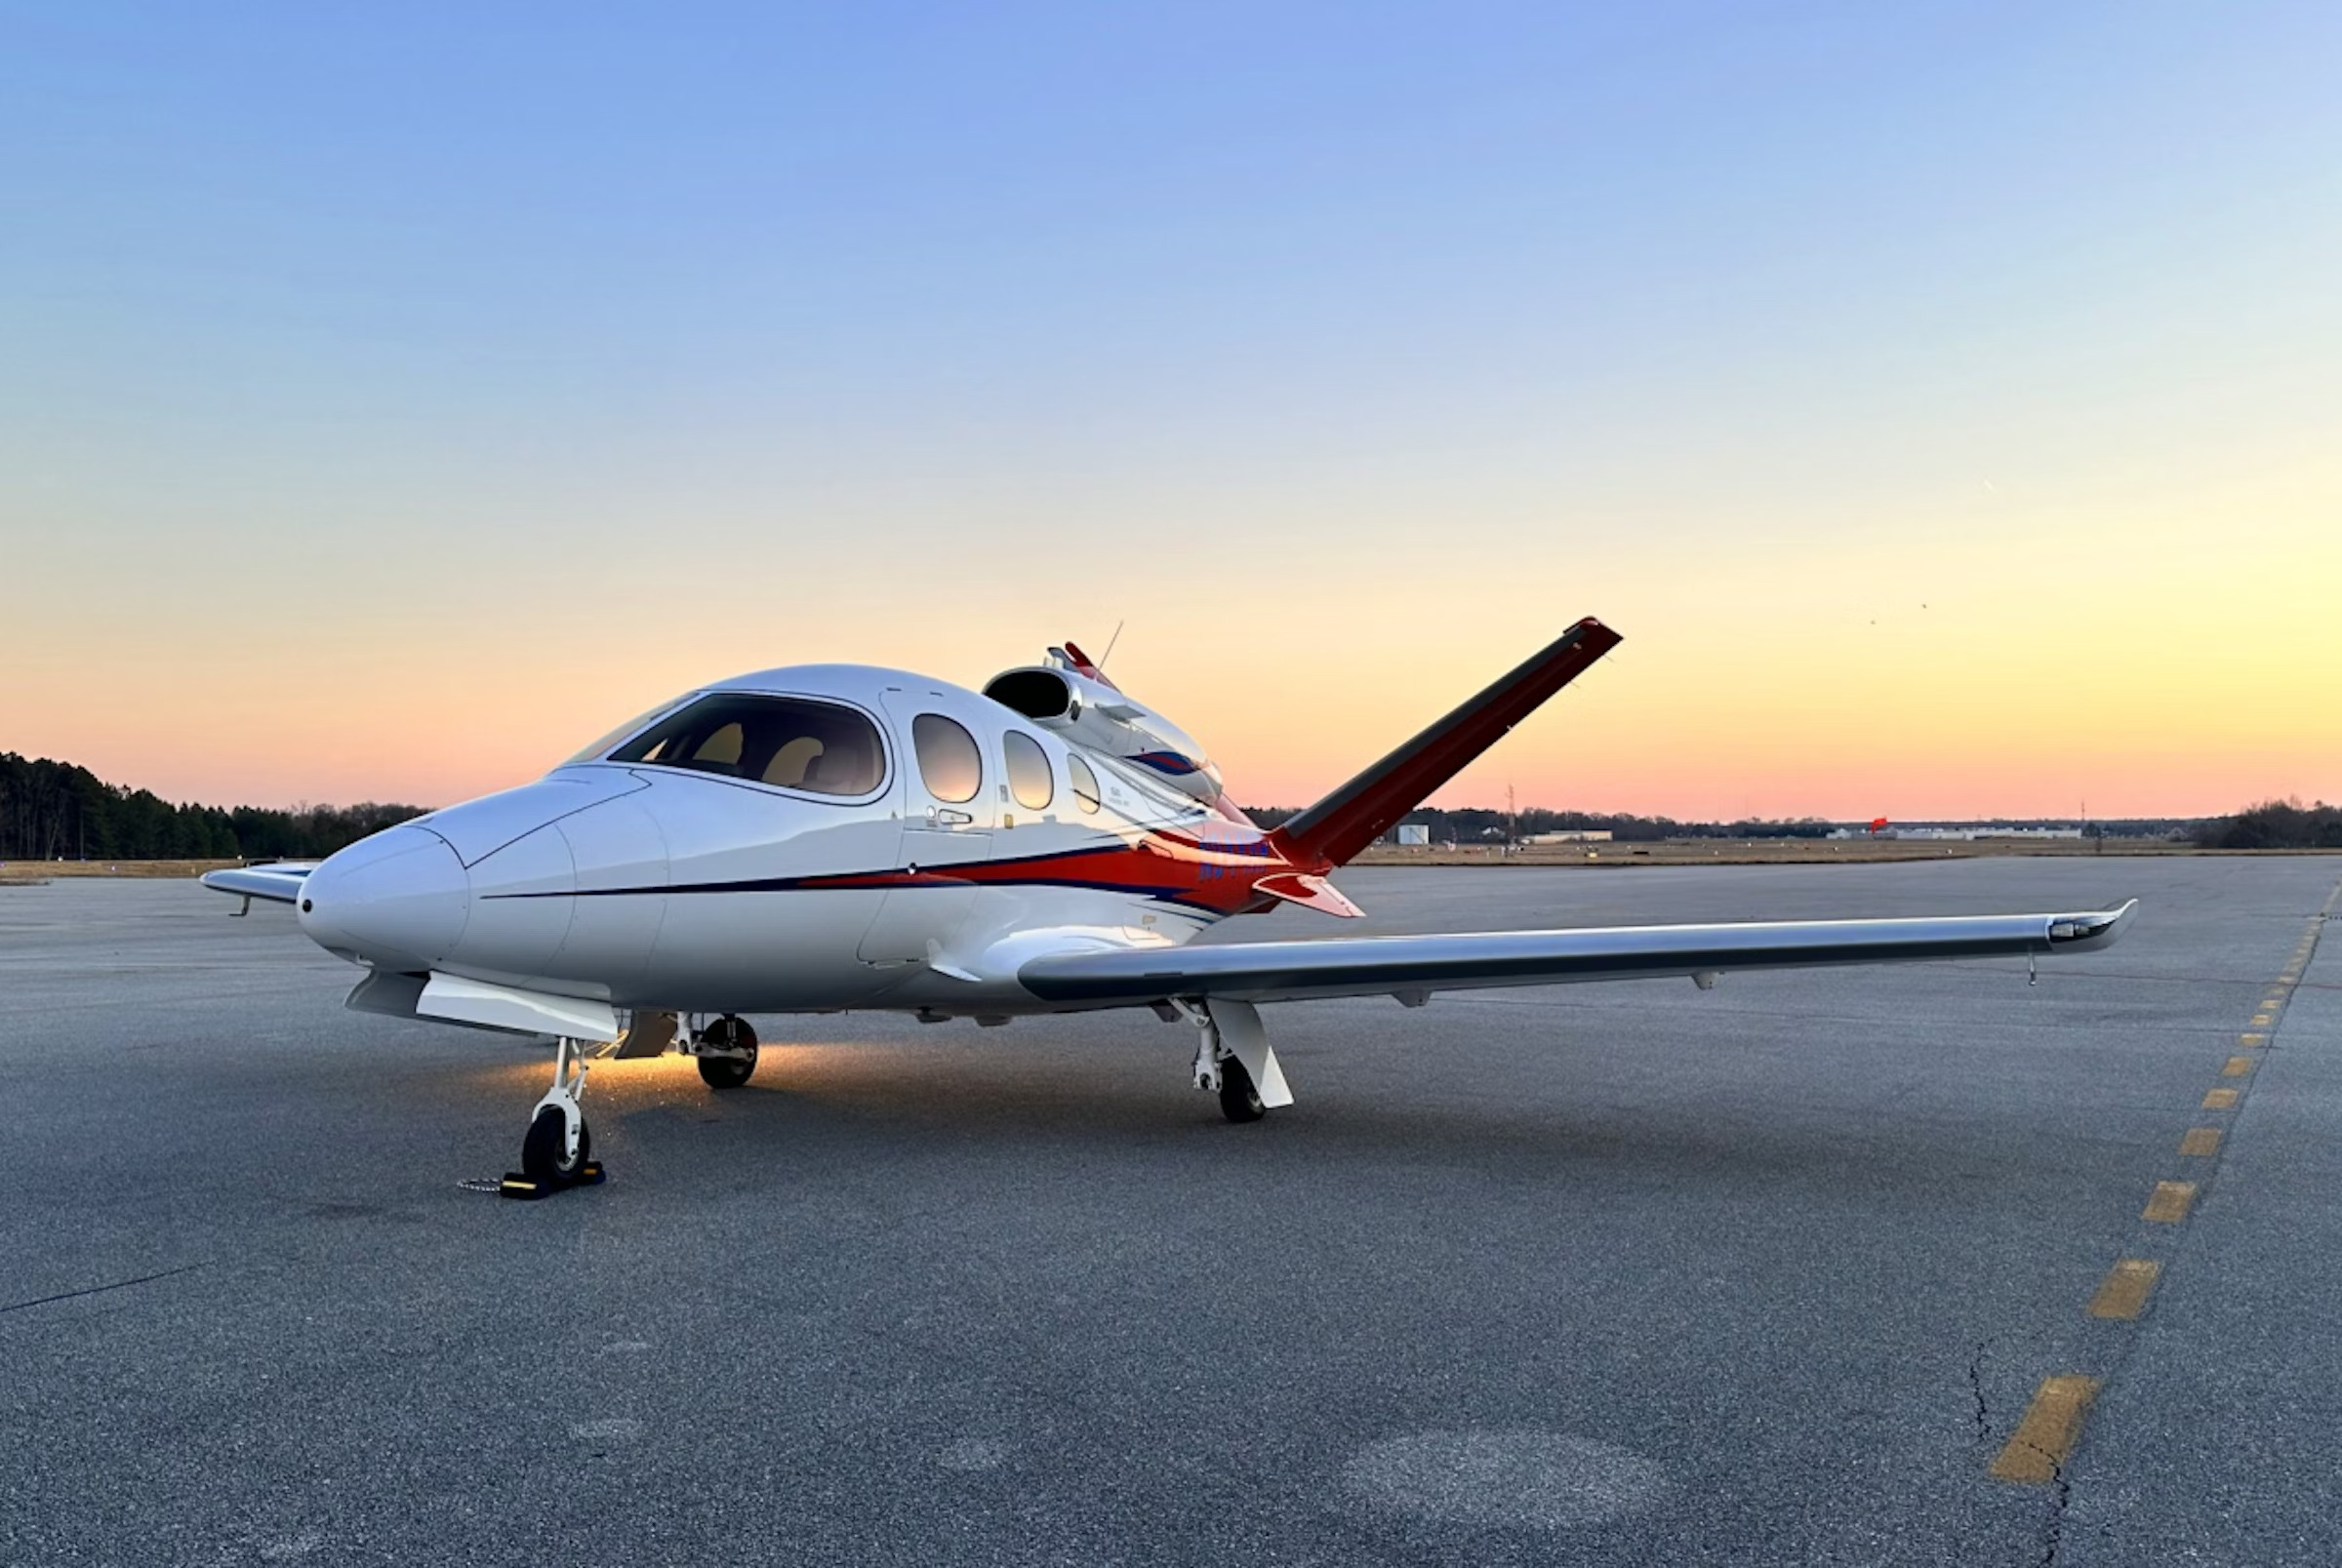 This 2019 Cirrus SF50 G2 Vision Jet Is a Step Up and an ‘AircraftForSale’ Top Pick